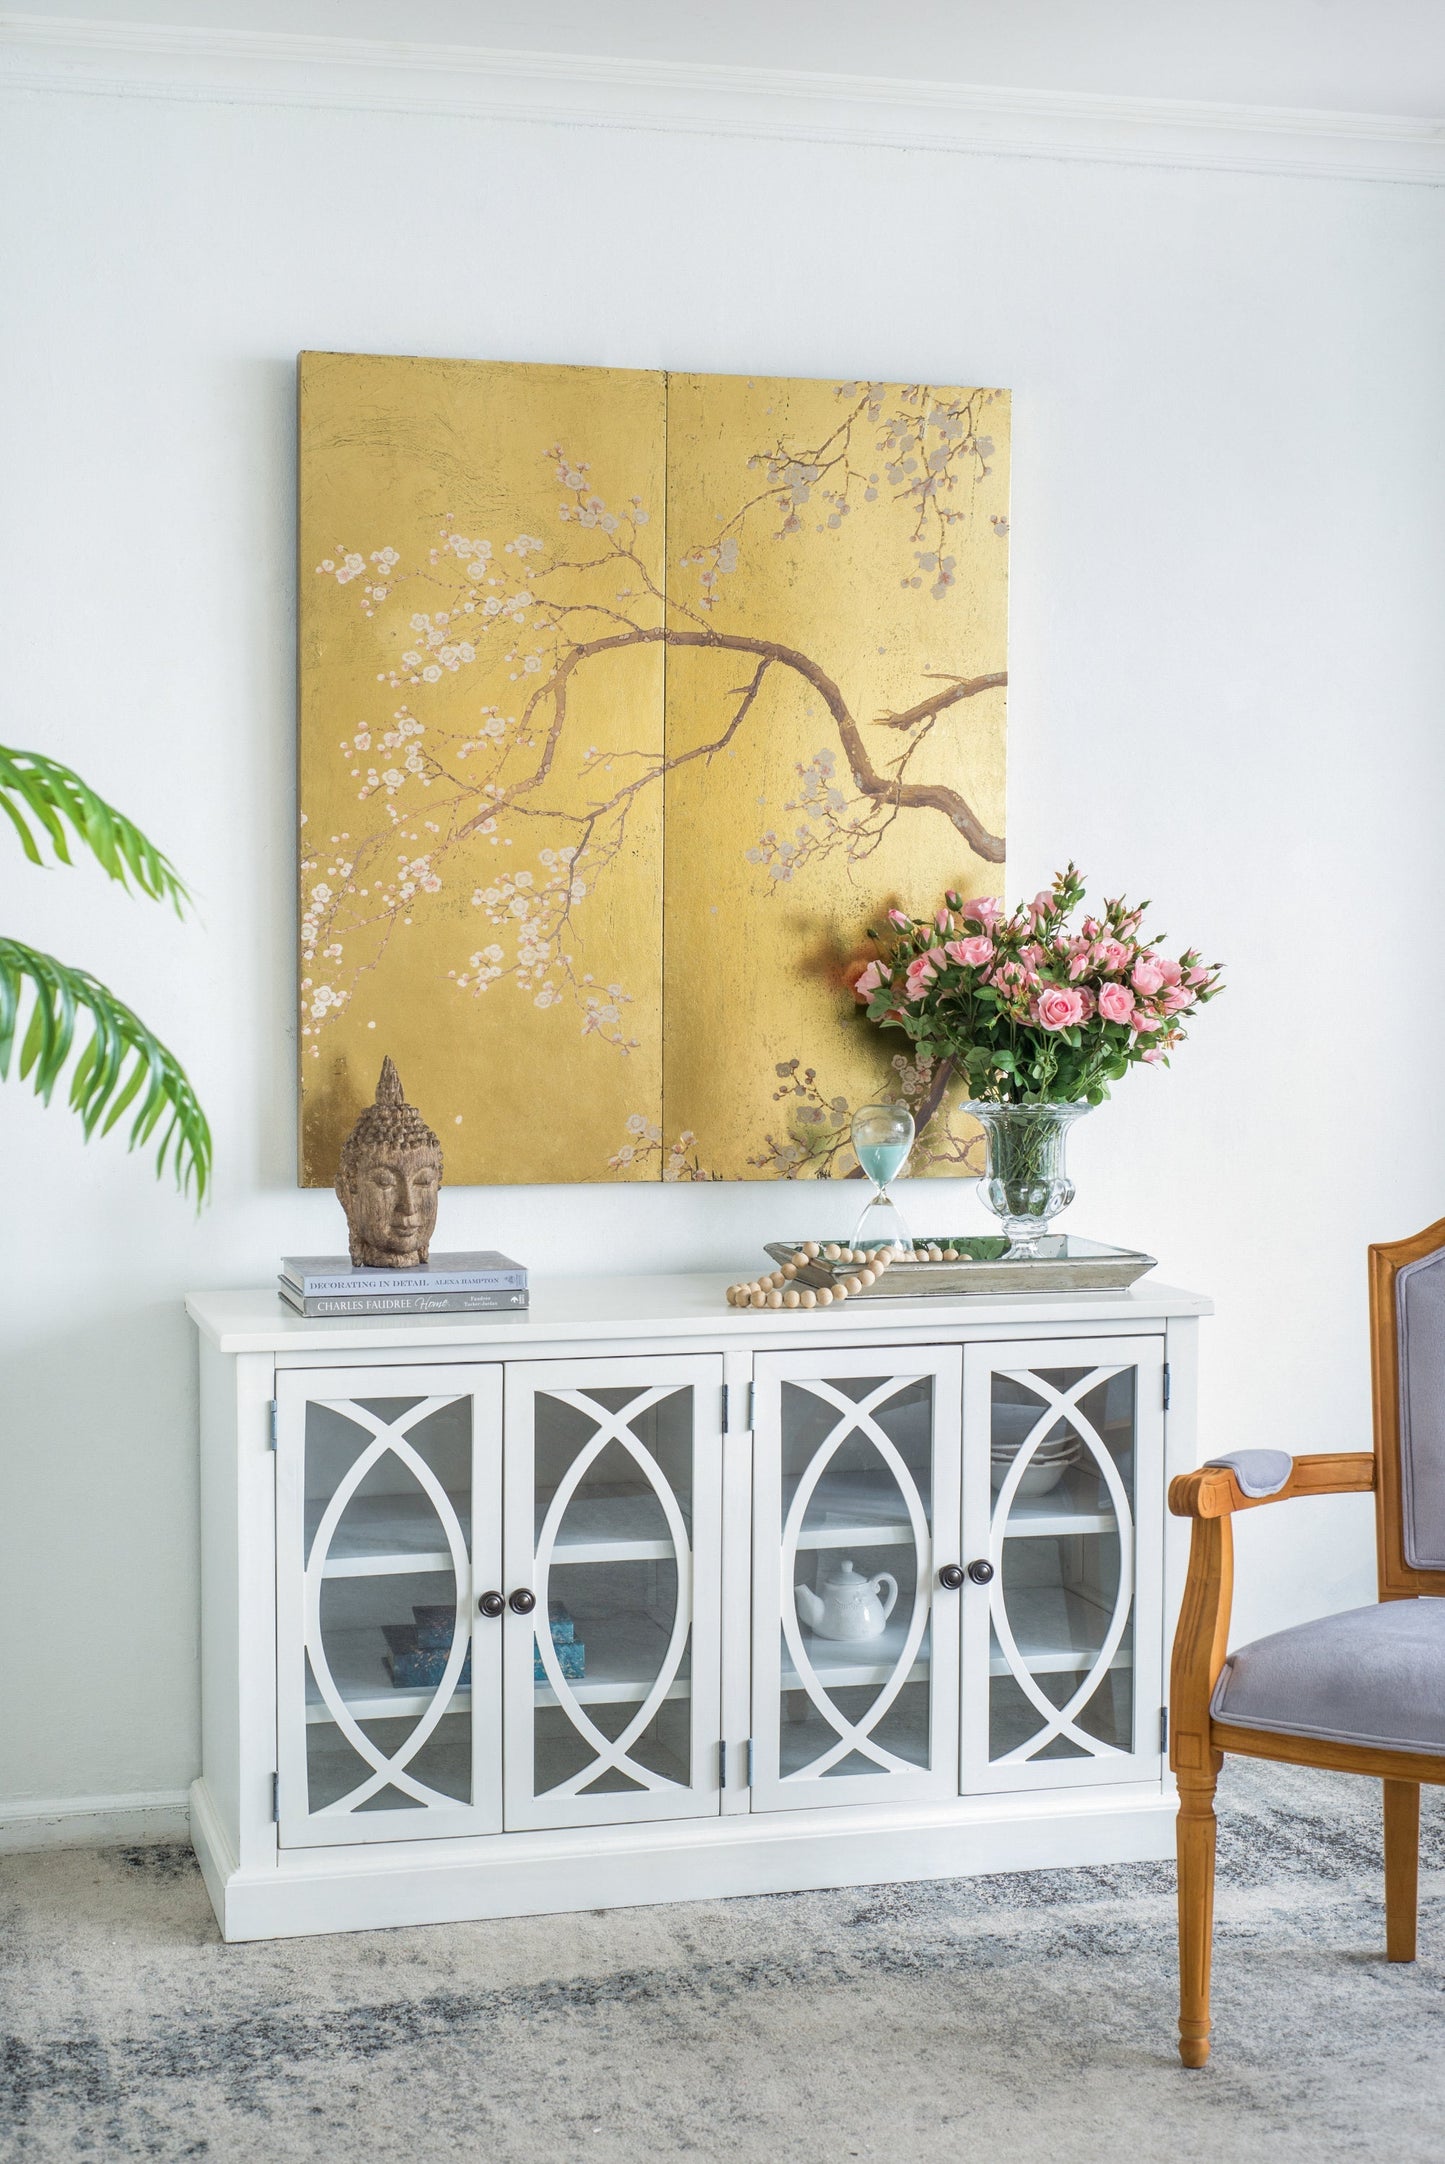 Set of 2 Cherry Blossom Wall Art Panels, Wall Decor for Living Room Dining Room Office Bedroom, 21.5" x 47"